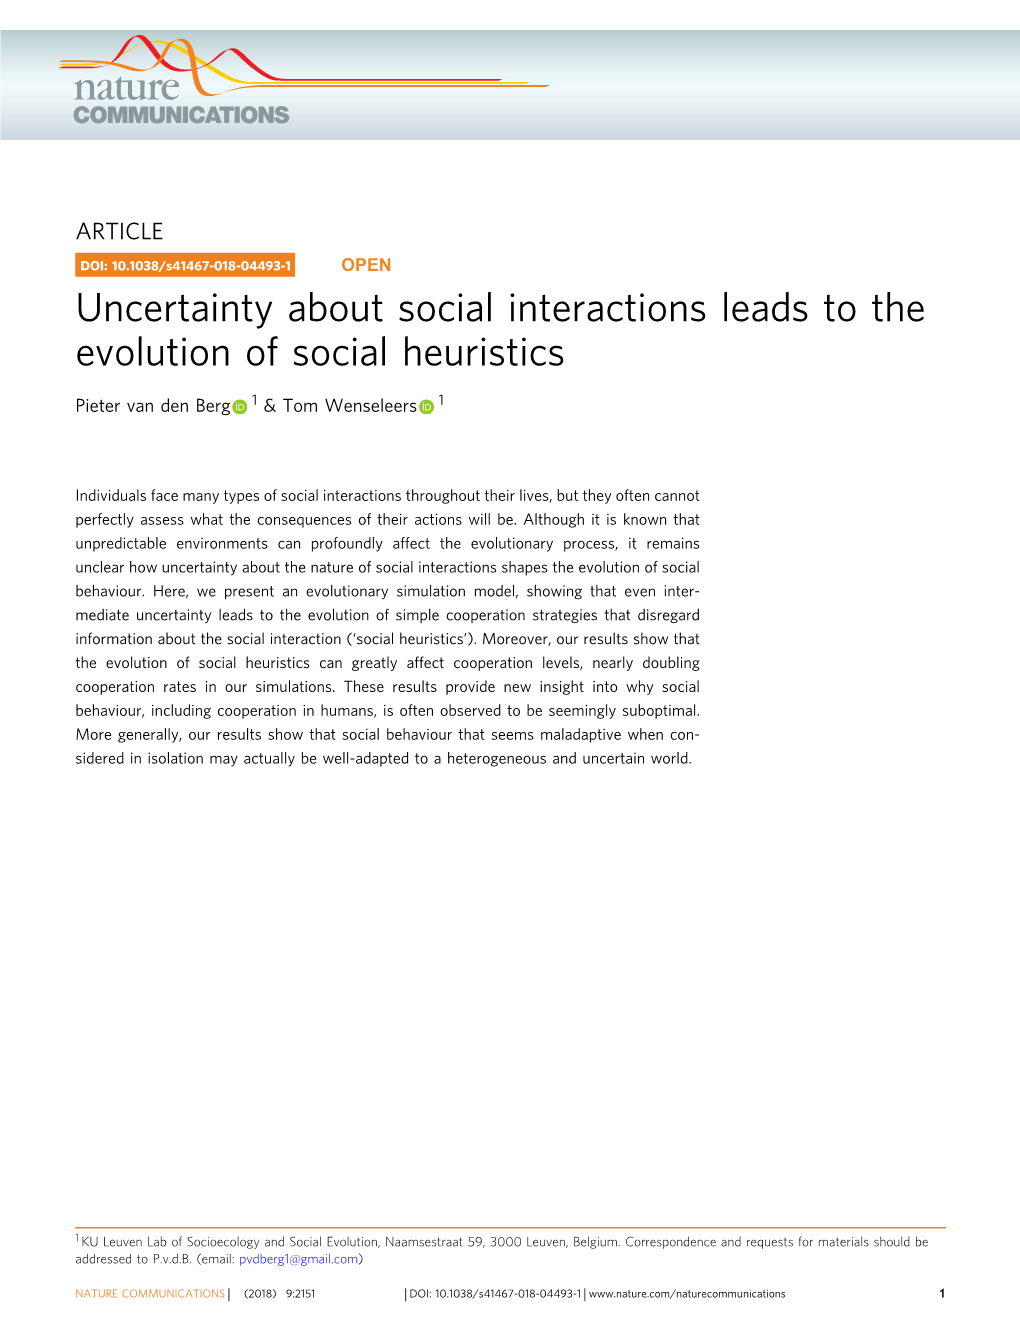 Uncertainty About Social Interactions Leads to the Evolution of Social Heuristics